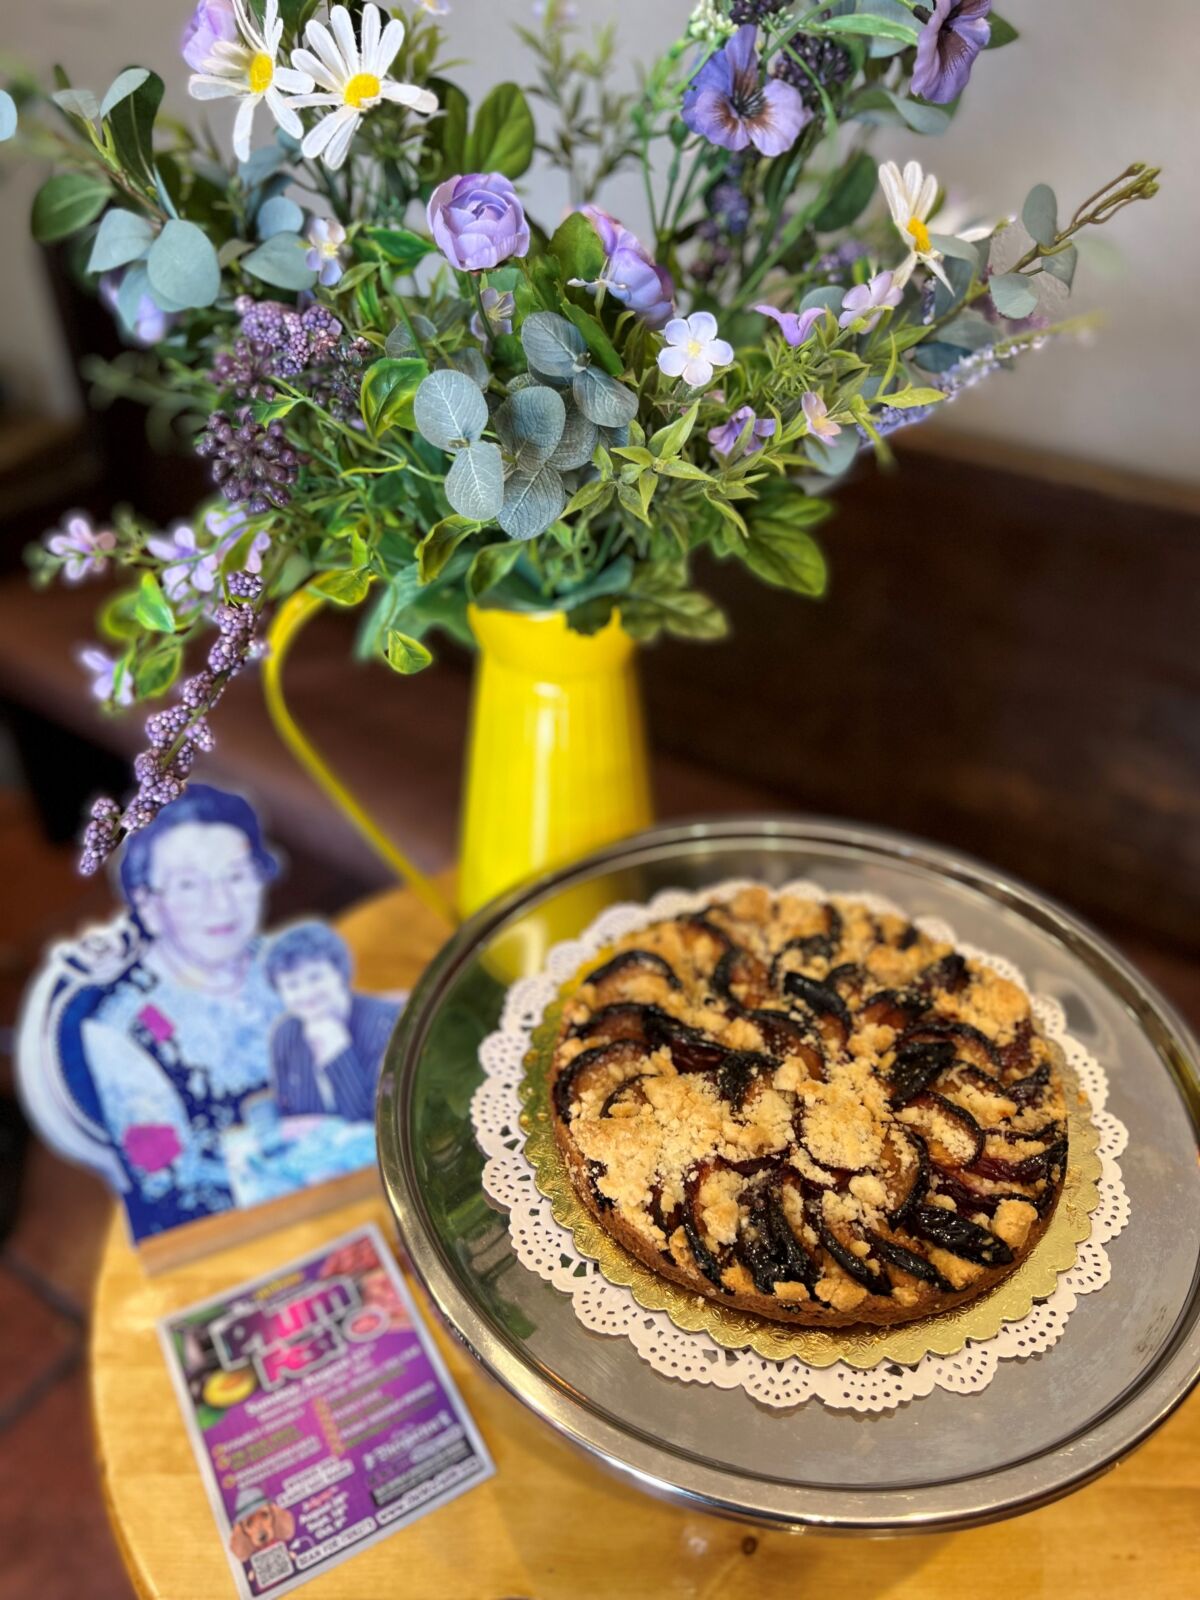 A fresh plum tart next to a photo of Elly Schwarzer and Dolores Bischof, who inspired Huntington Beach's annual Plum Fest.